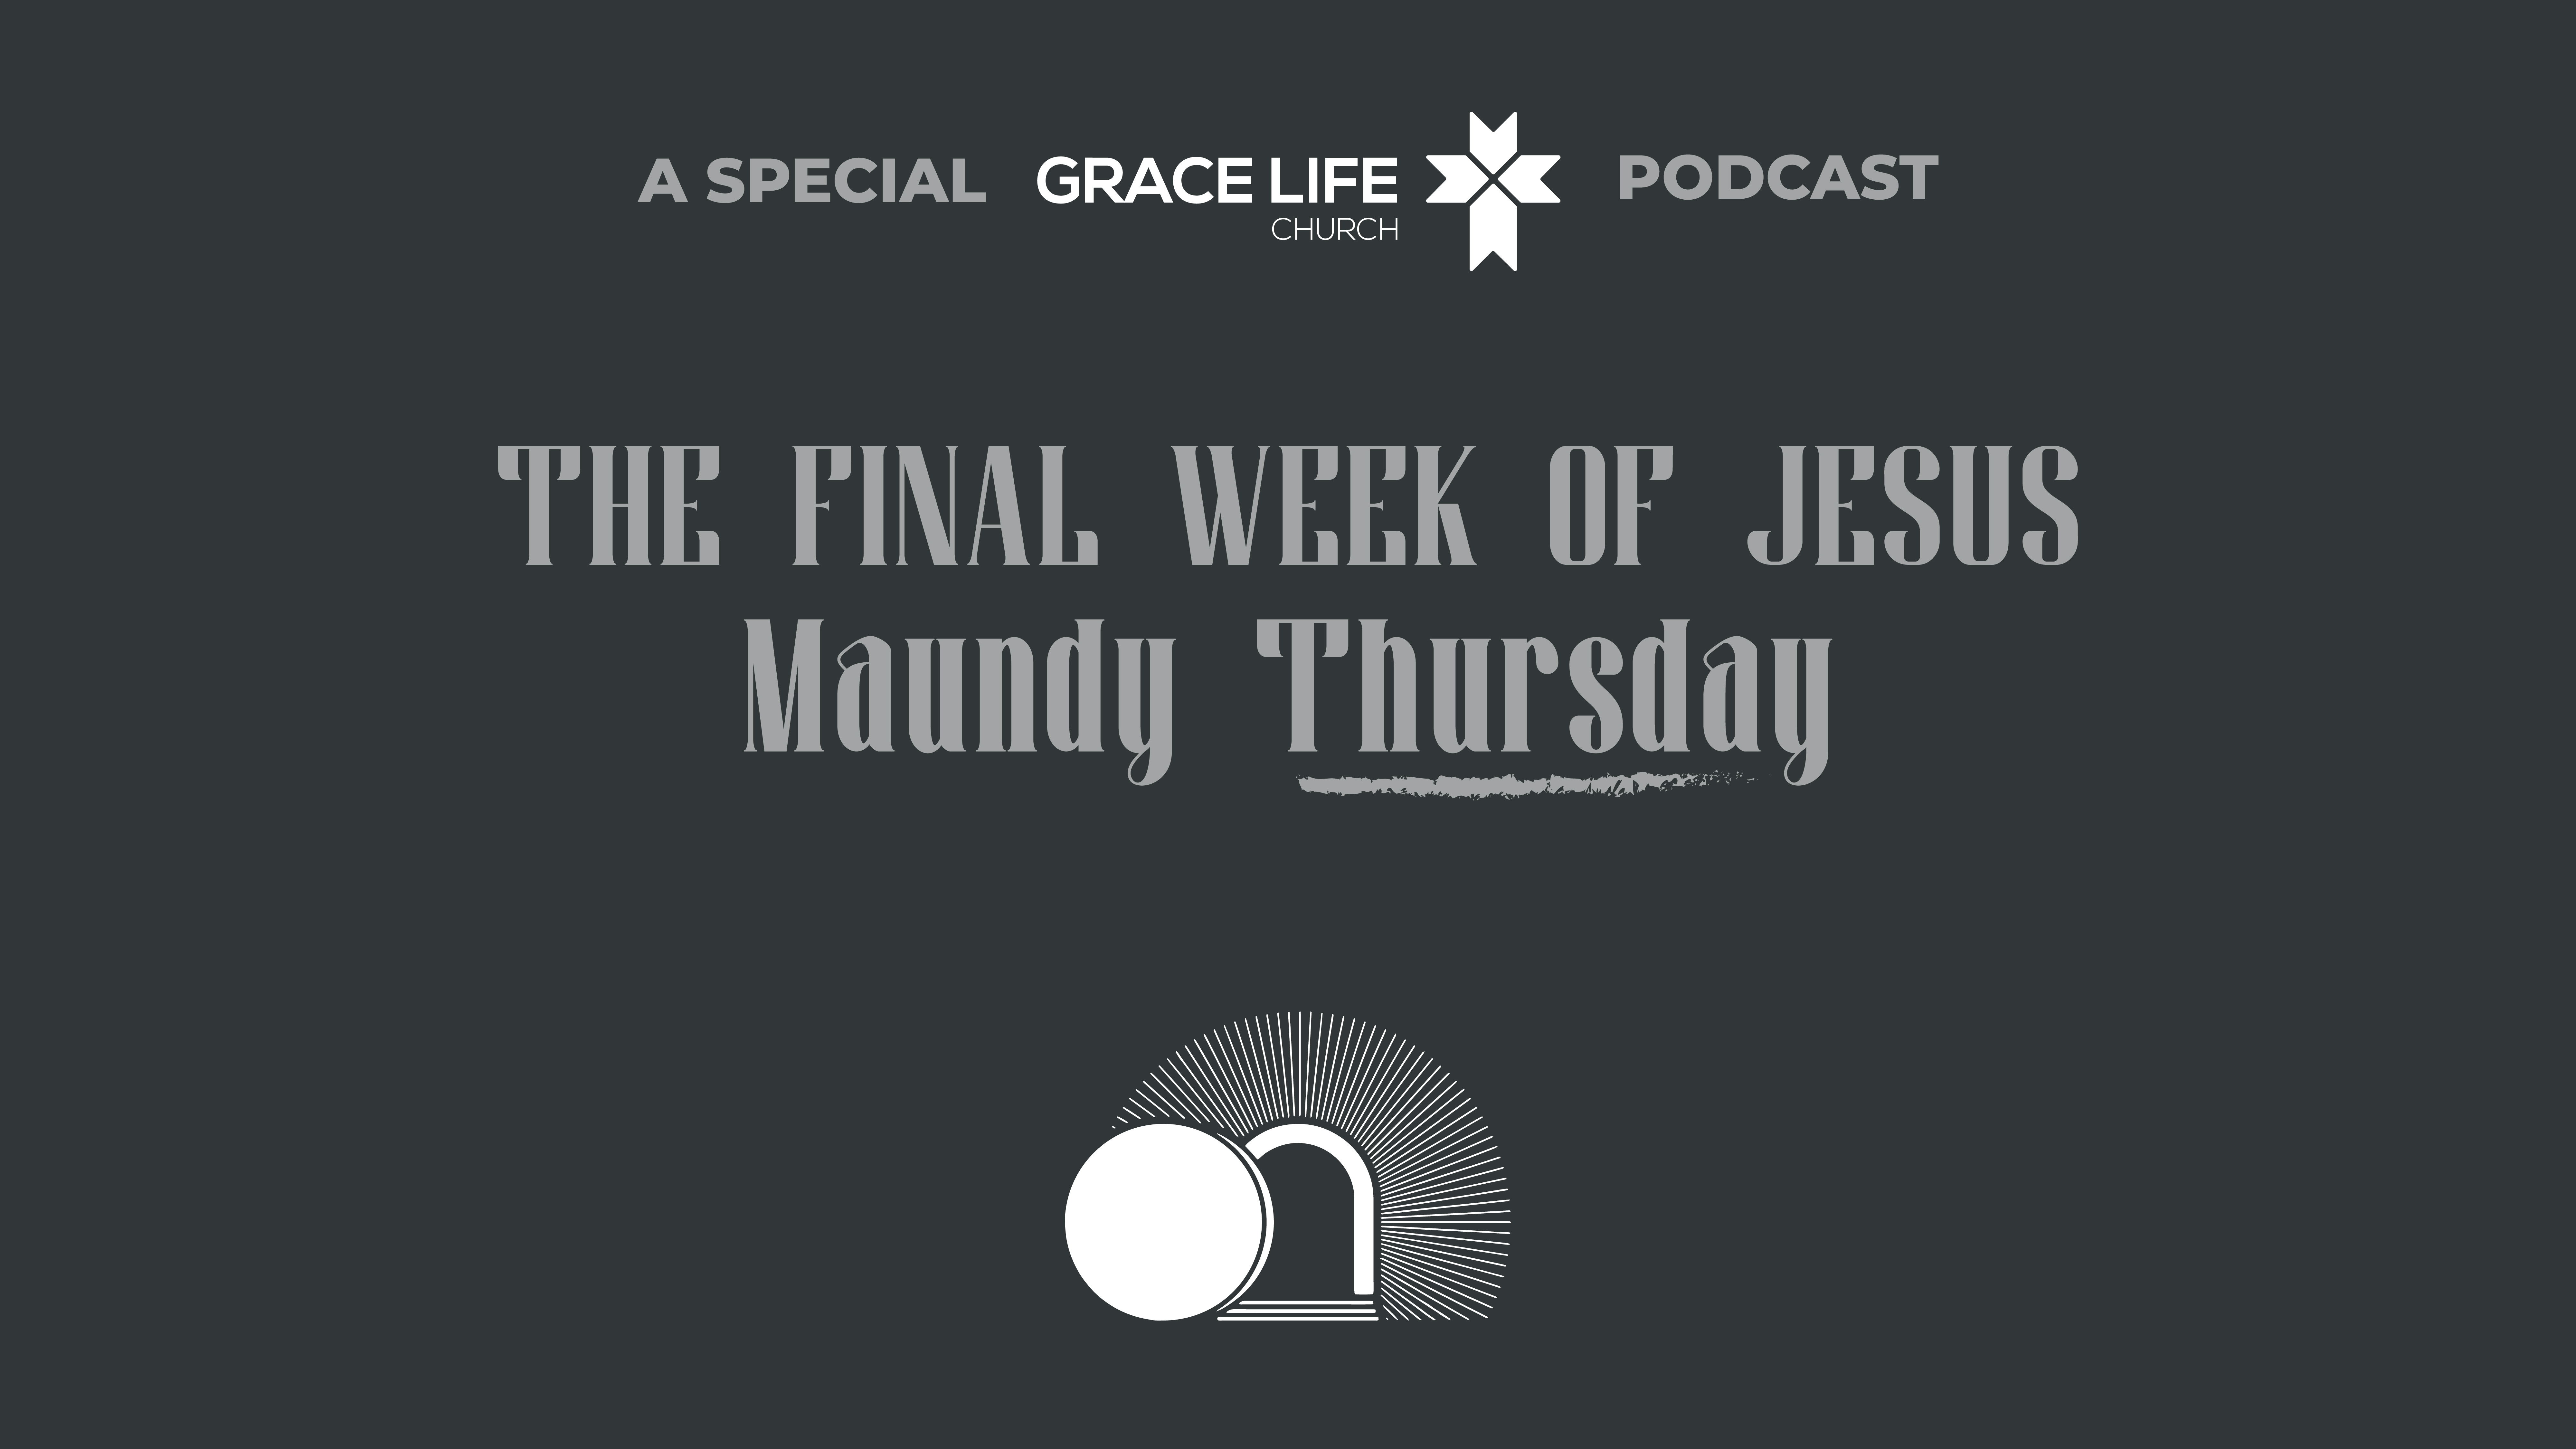 Maundy Thursday: The Final Week of Jesus